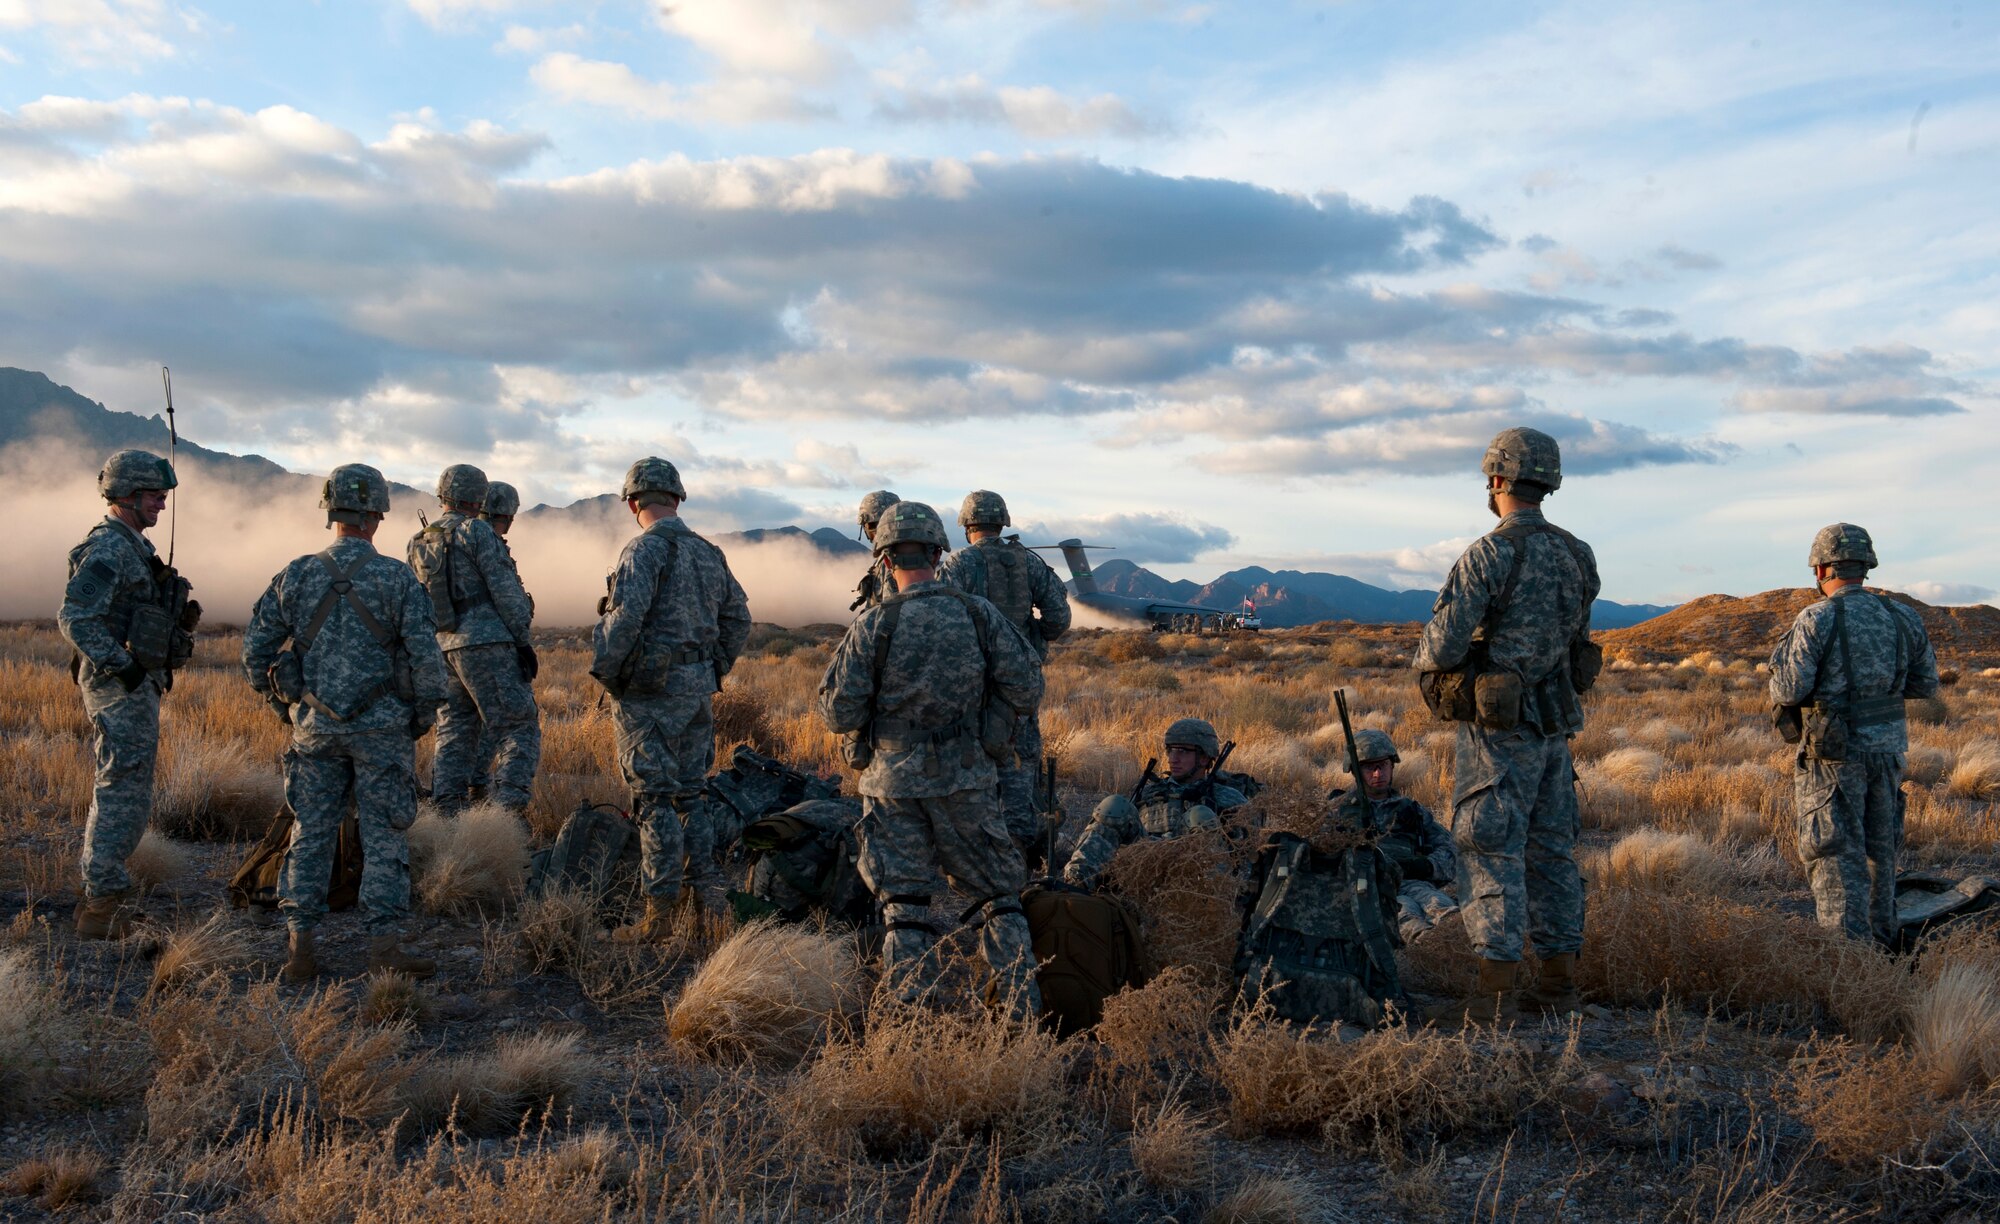 Paratroopers assigned to 3rd Brigade Combat Team, 82nd Airborne Division, Fort Bragg, N.C., watch a C-17 Globemaster III take off during the U.S. Air Force Weapons School's Joint Forcible Entry Exercise 14B on the Nevada Test and Training Range Dec. 6, 2014. More than 100 paratroopers and approximately 100 aircraft participated in the exercise as part of the USAFWS’ large-scale air mobility exercise to train students to contribute strategically to a joint operation. (U.S. Air Force photo by Staff Sgt. Victoria Sneed)